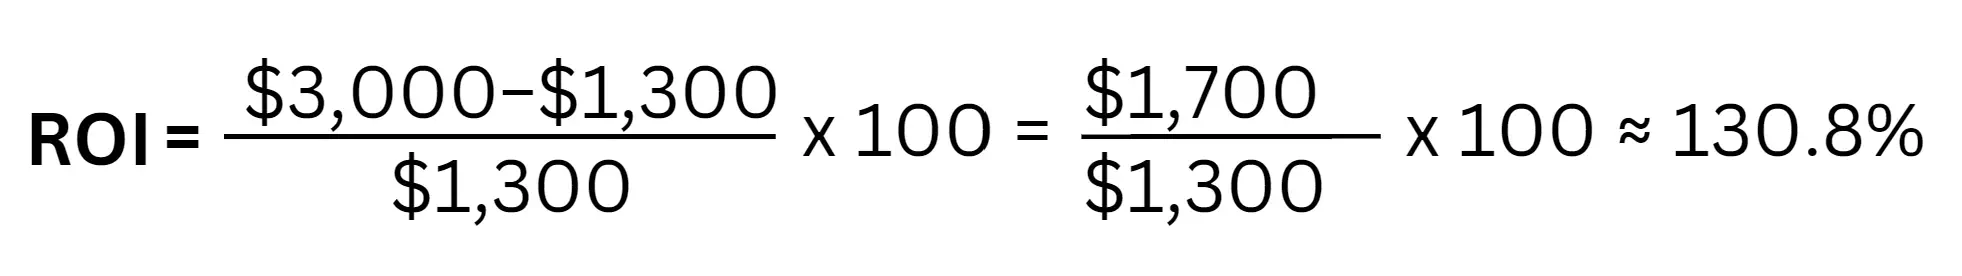 Visualization of the equation for calculating ROI.